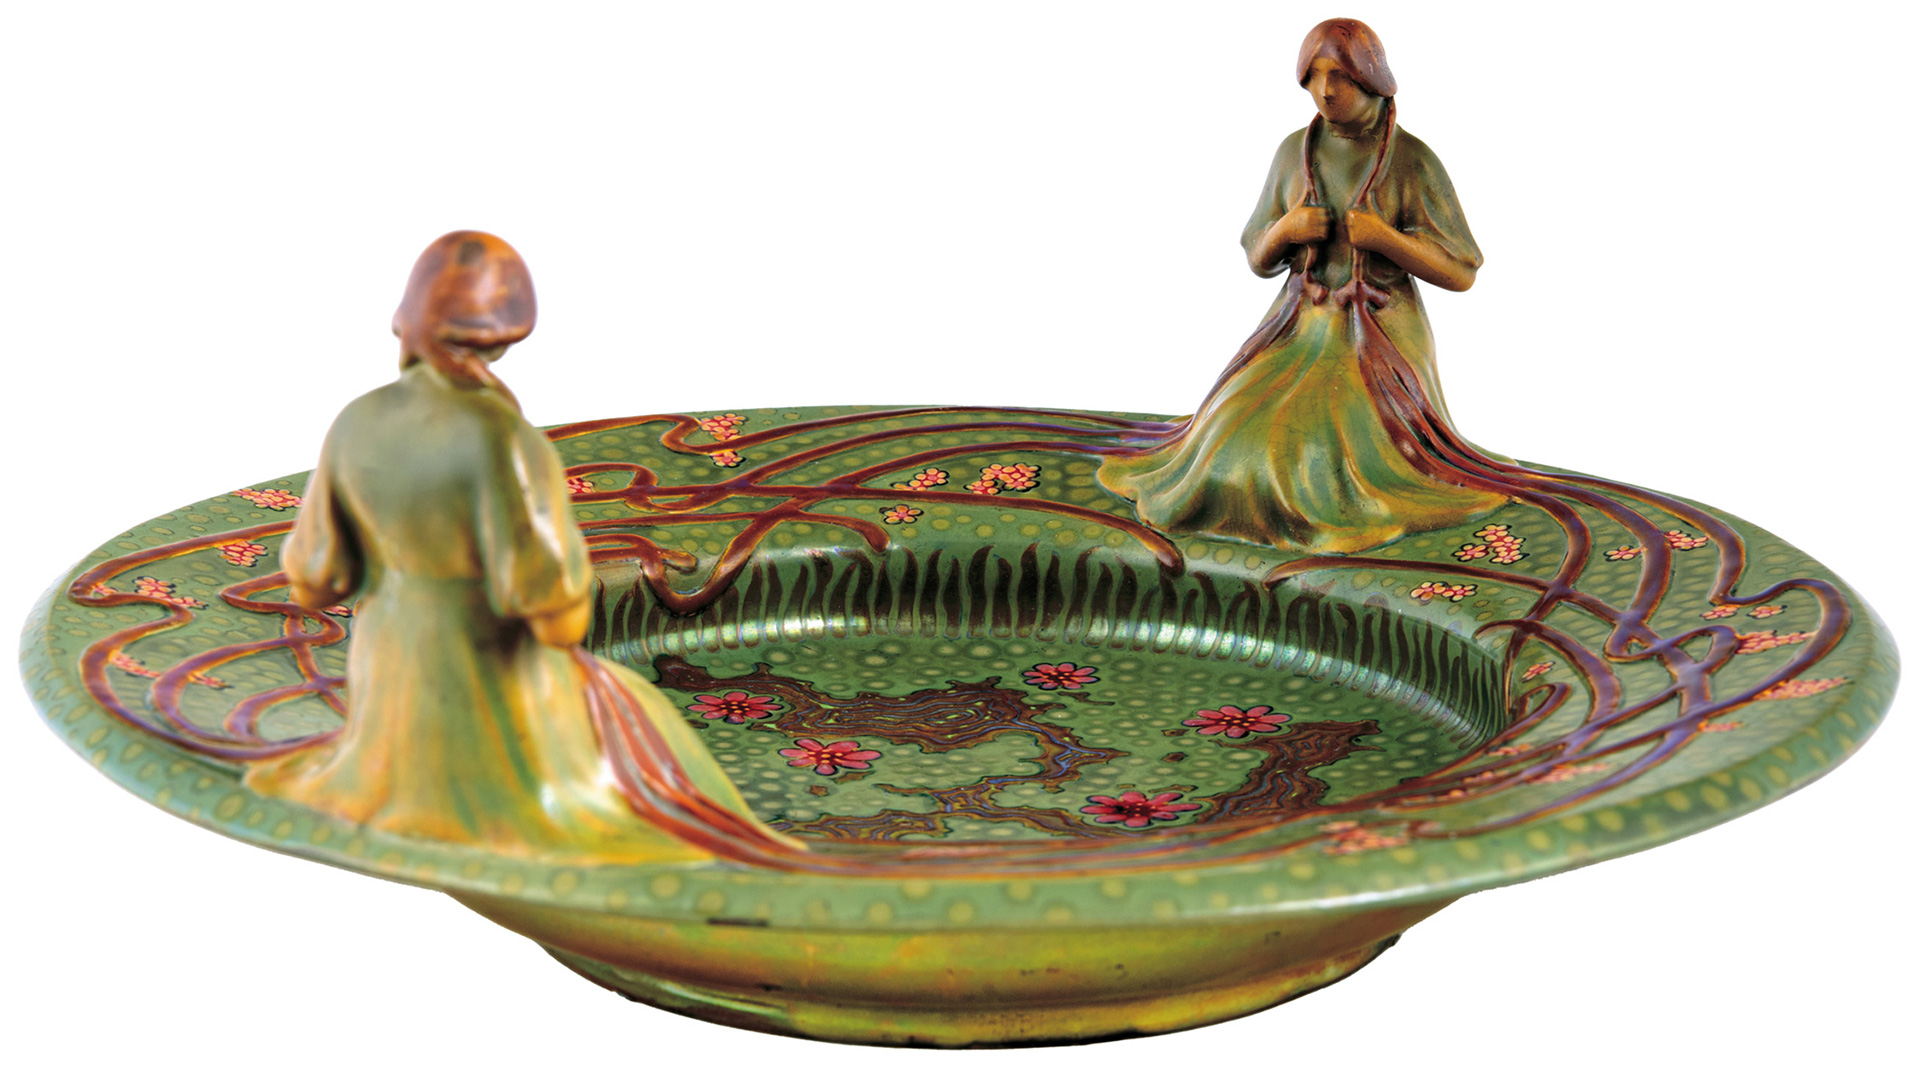 Zsolnay Centerpiece with Two Female Figures on the rim, Zsolnay, 1903,  FORM PLAN BY: APÁTI-ABT SÁNDOR,, MODELLED BY: MACK LAJOS